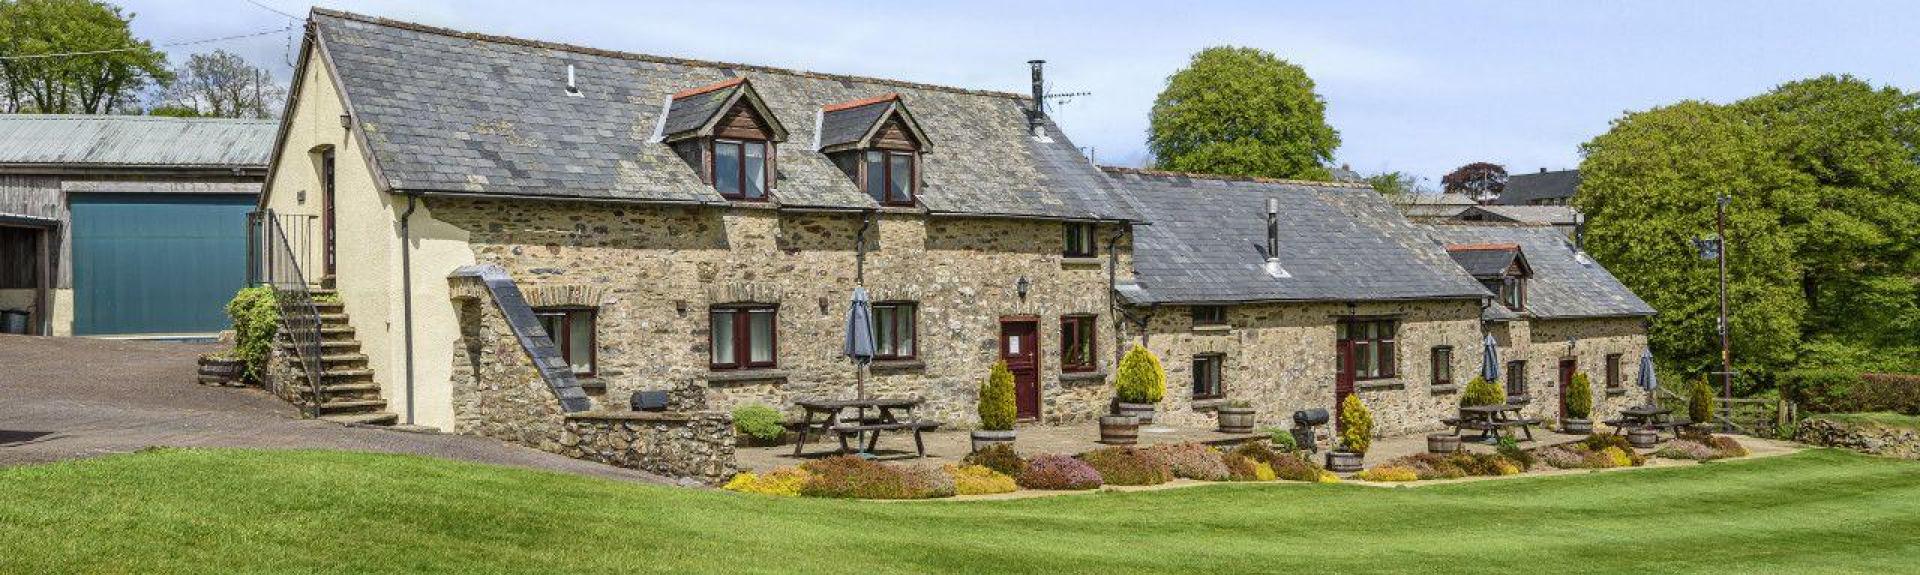 Exterior of a stone-built Exmoor Holiday Cottage surrounded by spacious lawns.